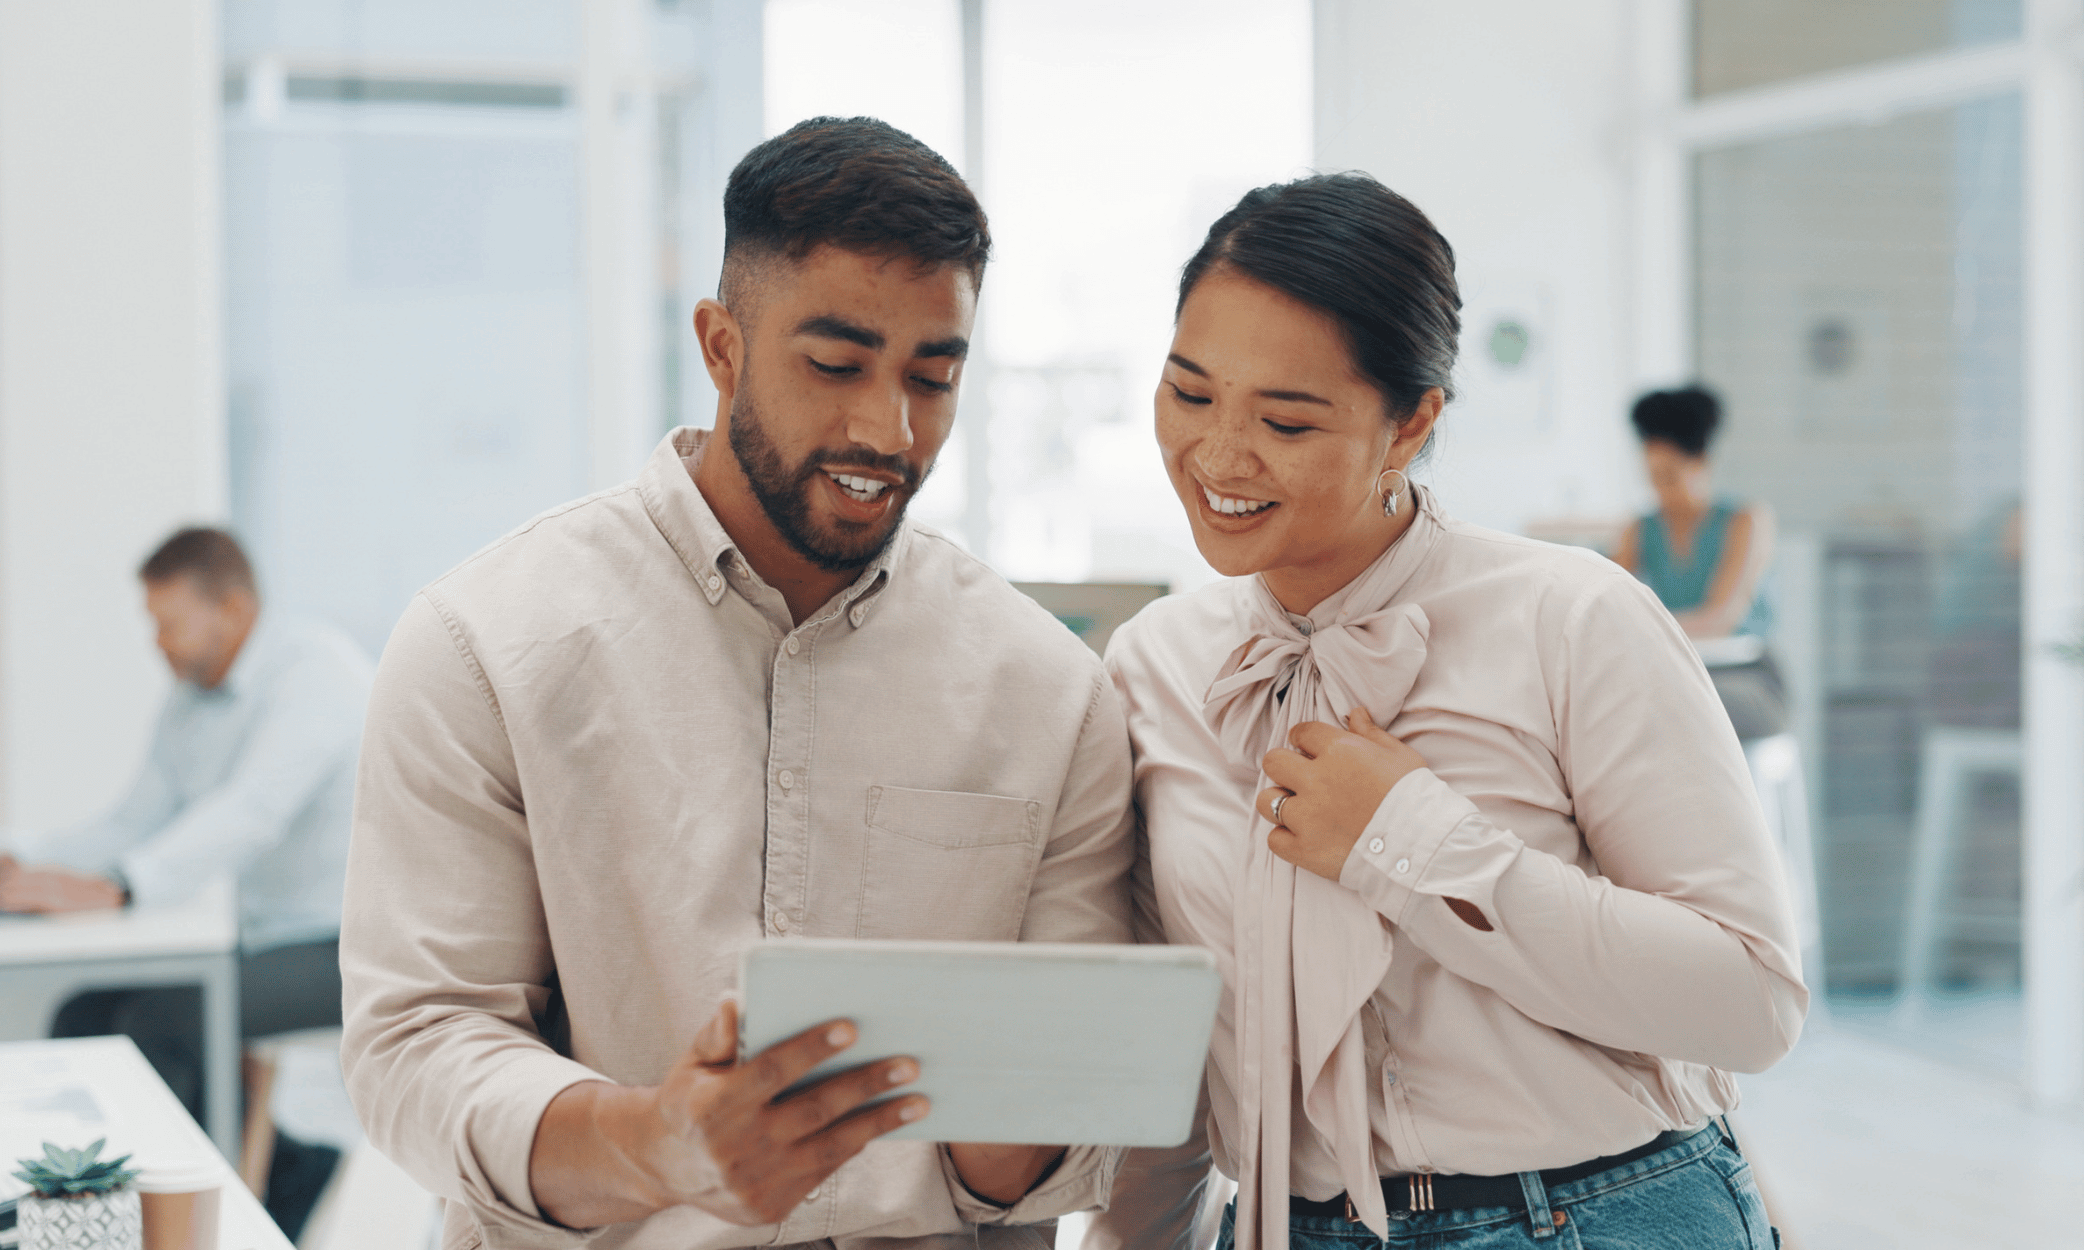 Two people looking at a tablet and smiling.